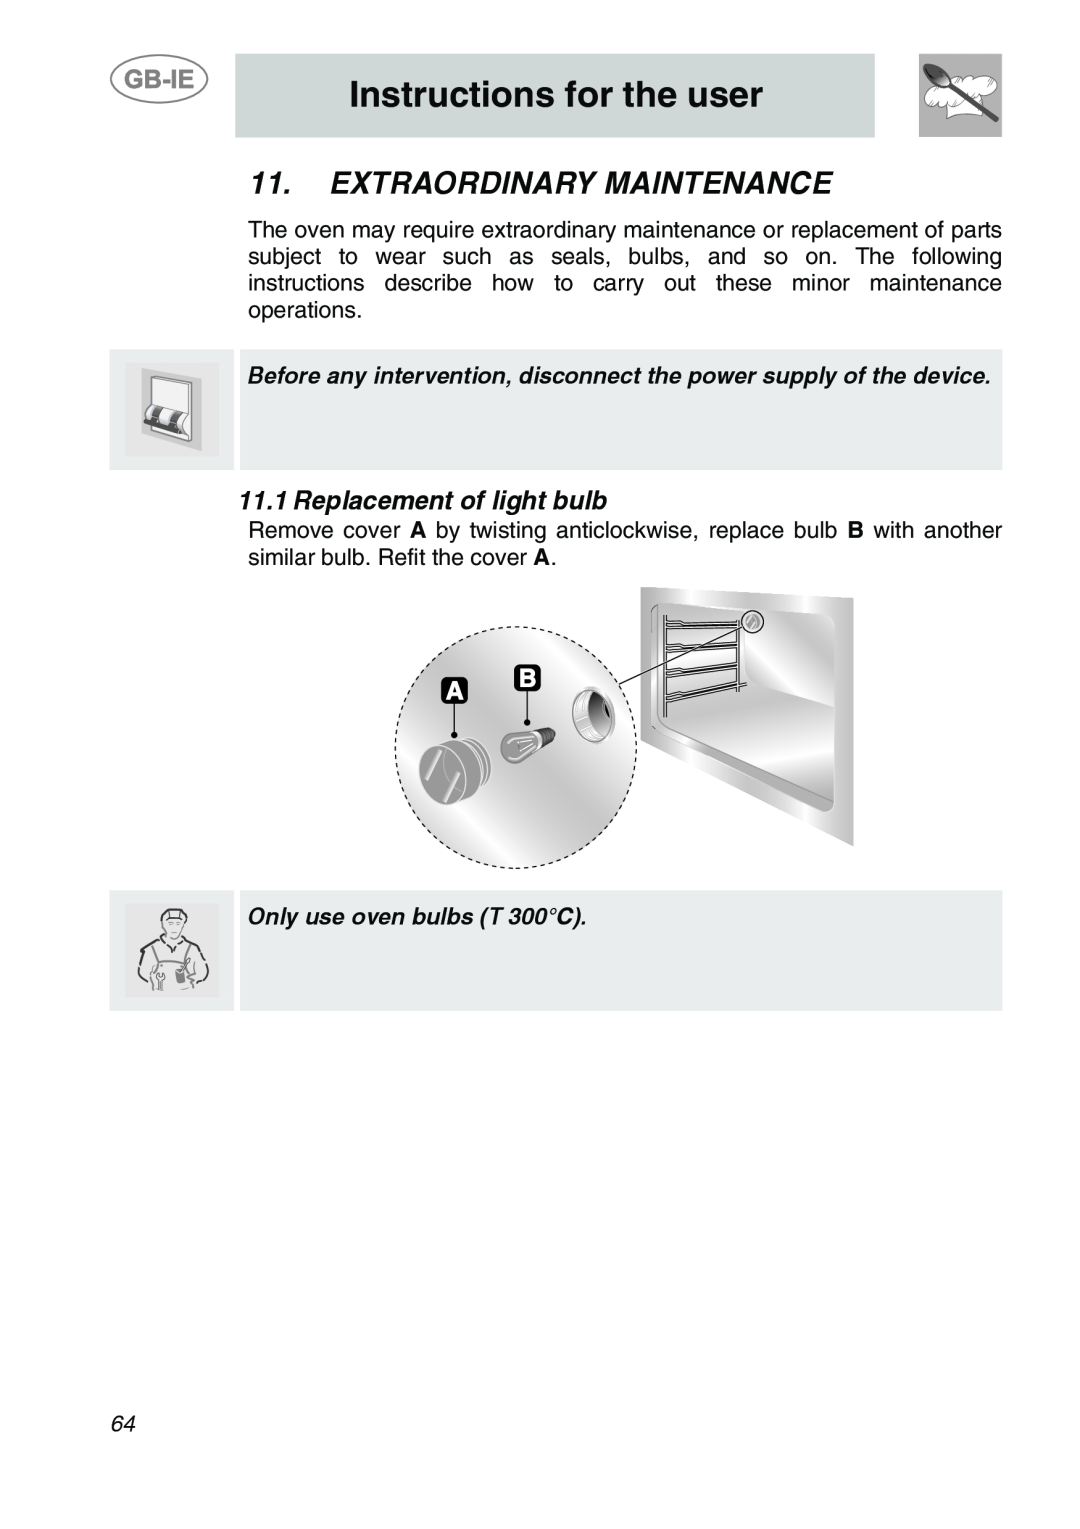 Smeg A1-6 manual Extraordinary Maintenance, Replacement of light bulb, Instructions for the user 